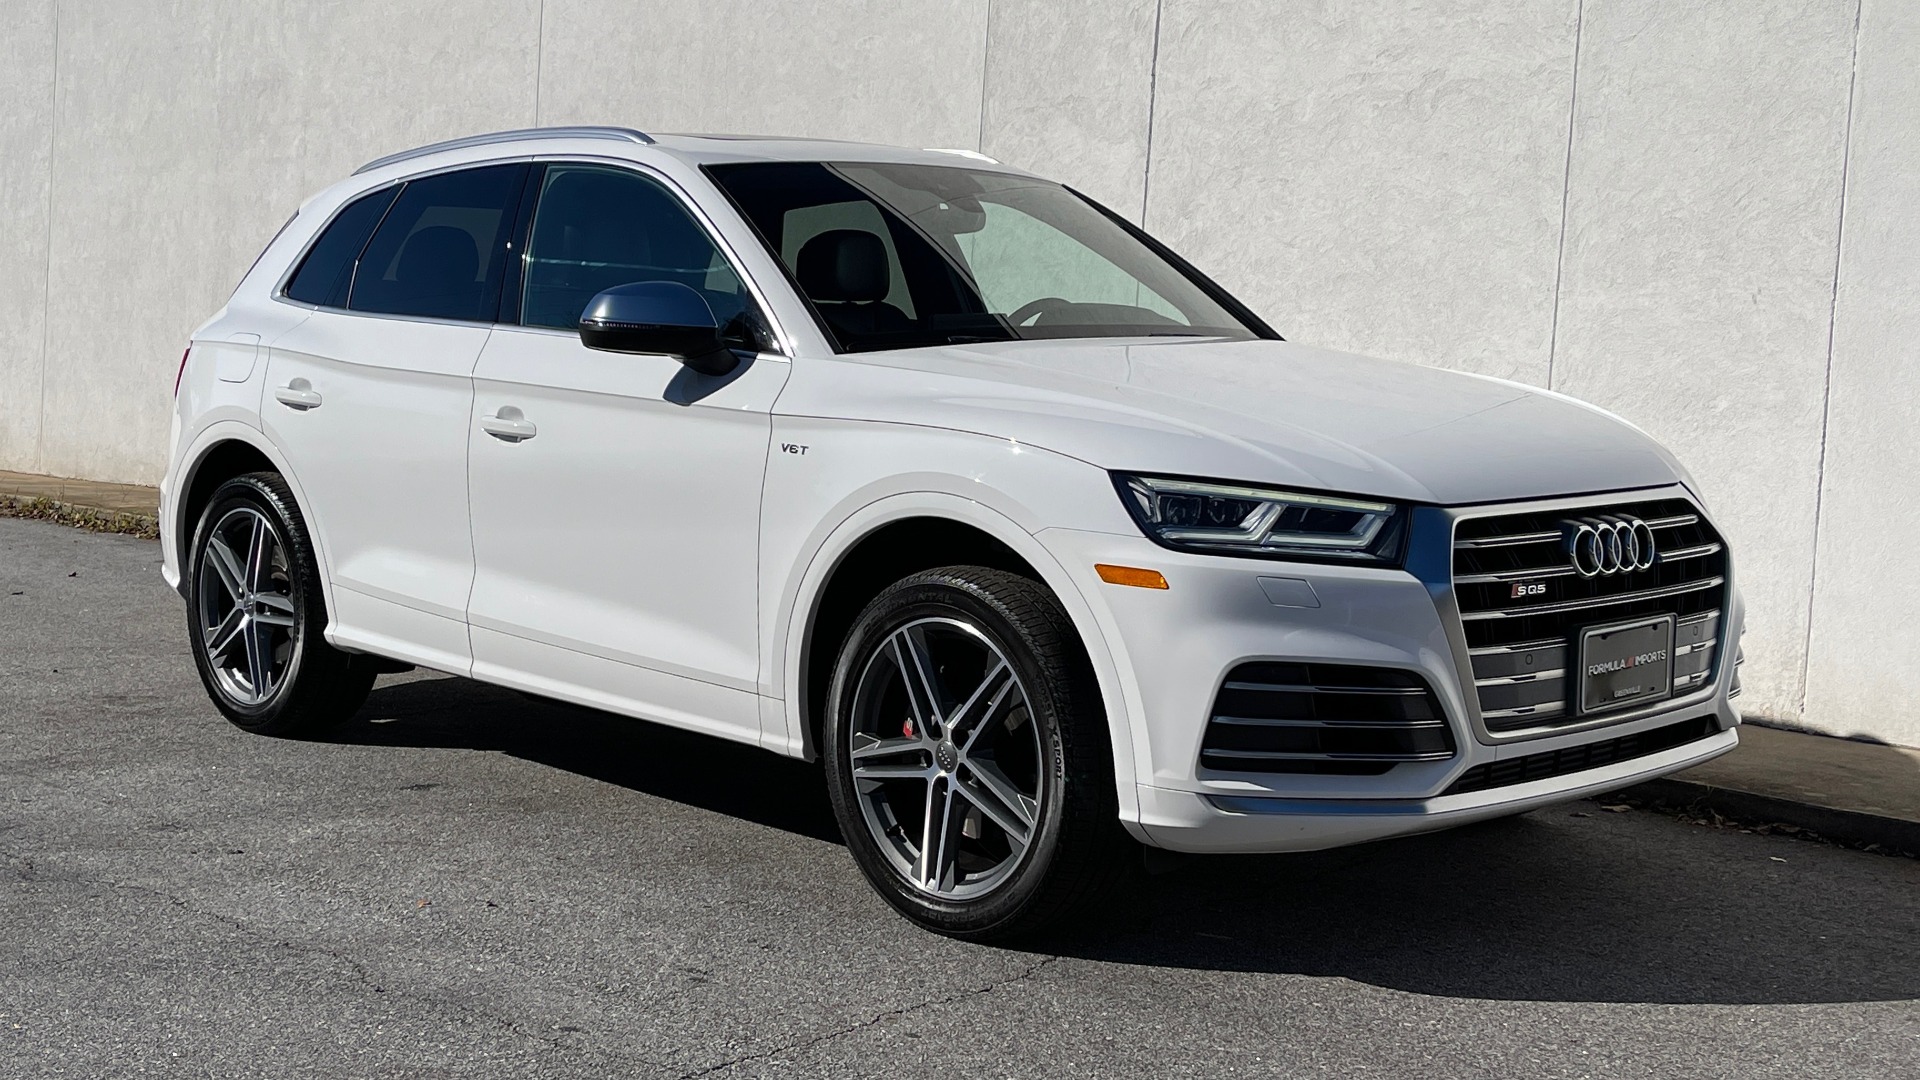 Used 2018 Audi SQ5 PREMIUM PLUS / NAV / SUNROOF / 12.3IN SCREEN / REARVIEW for sale $46,795 at Formula Imports in Charlotte NC 28227 5